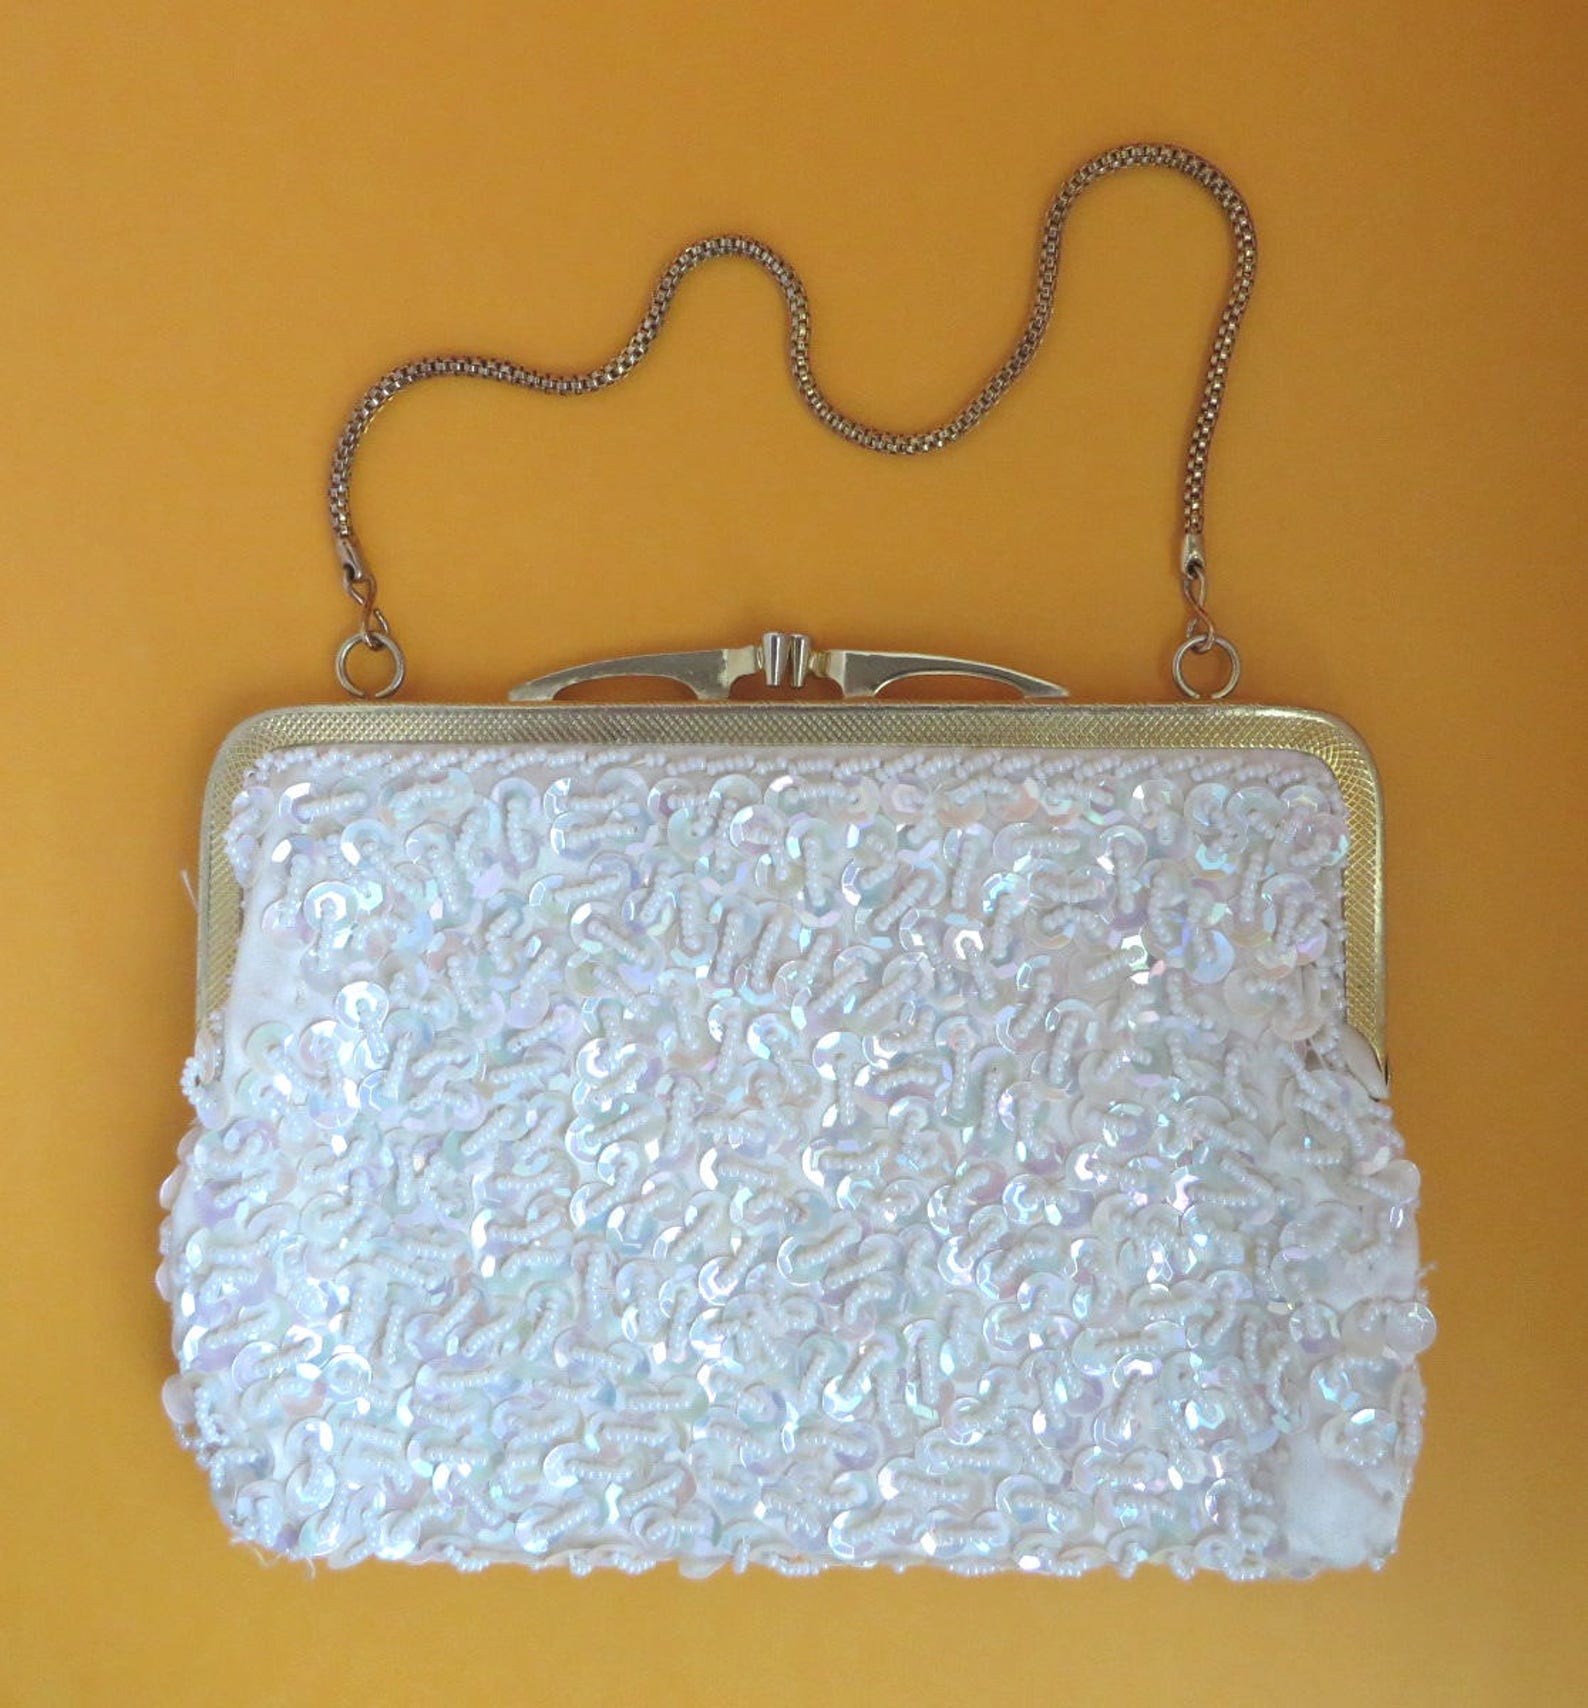 Vintage White Beaded Evening Bag Sequined Chain Handle Purse | Etsy